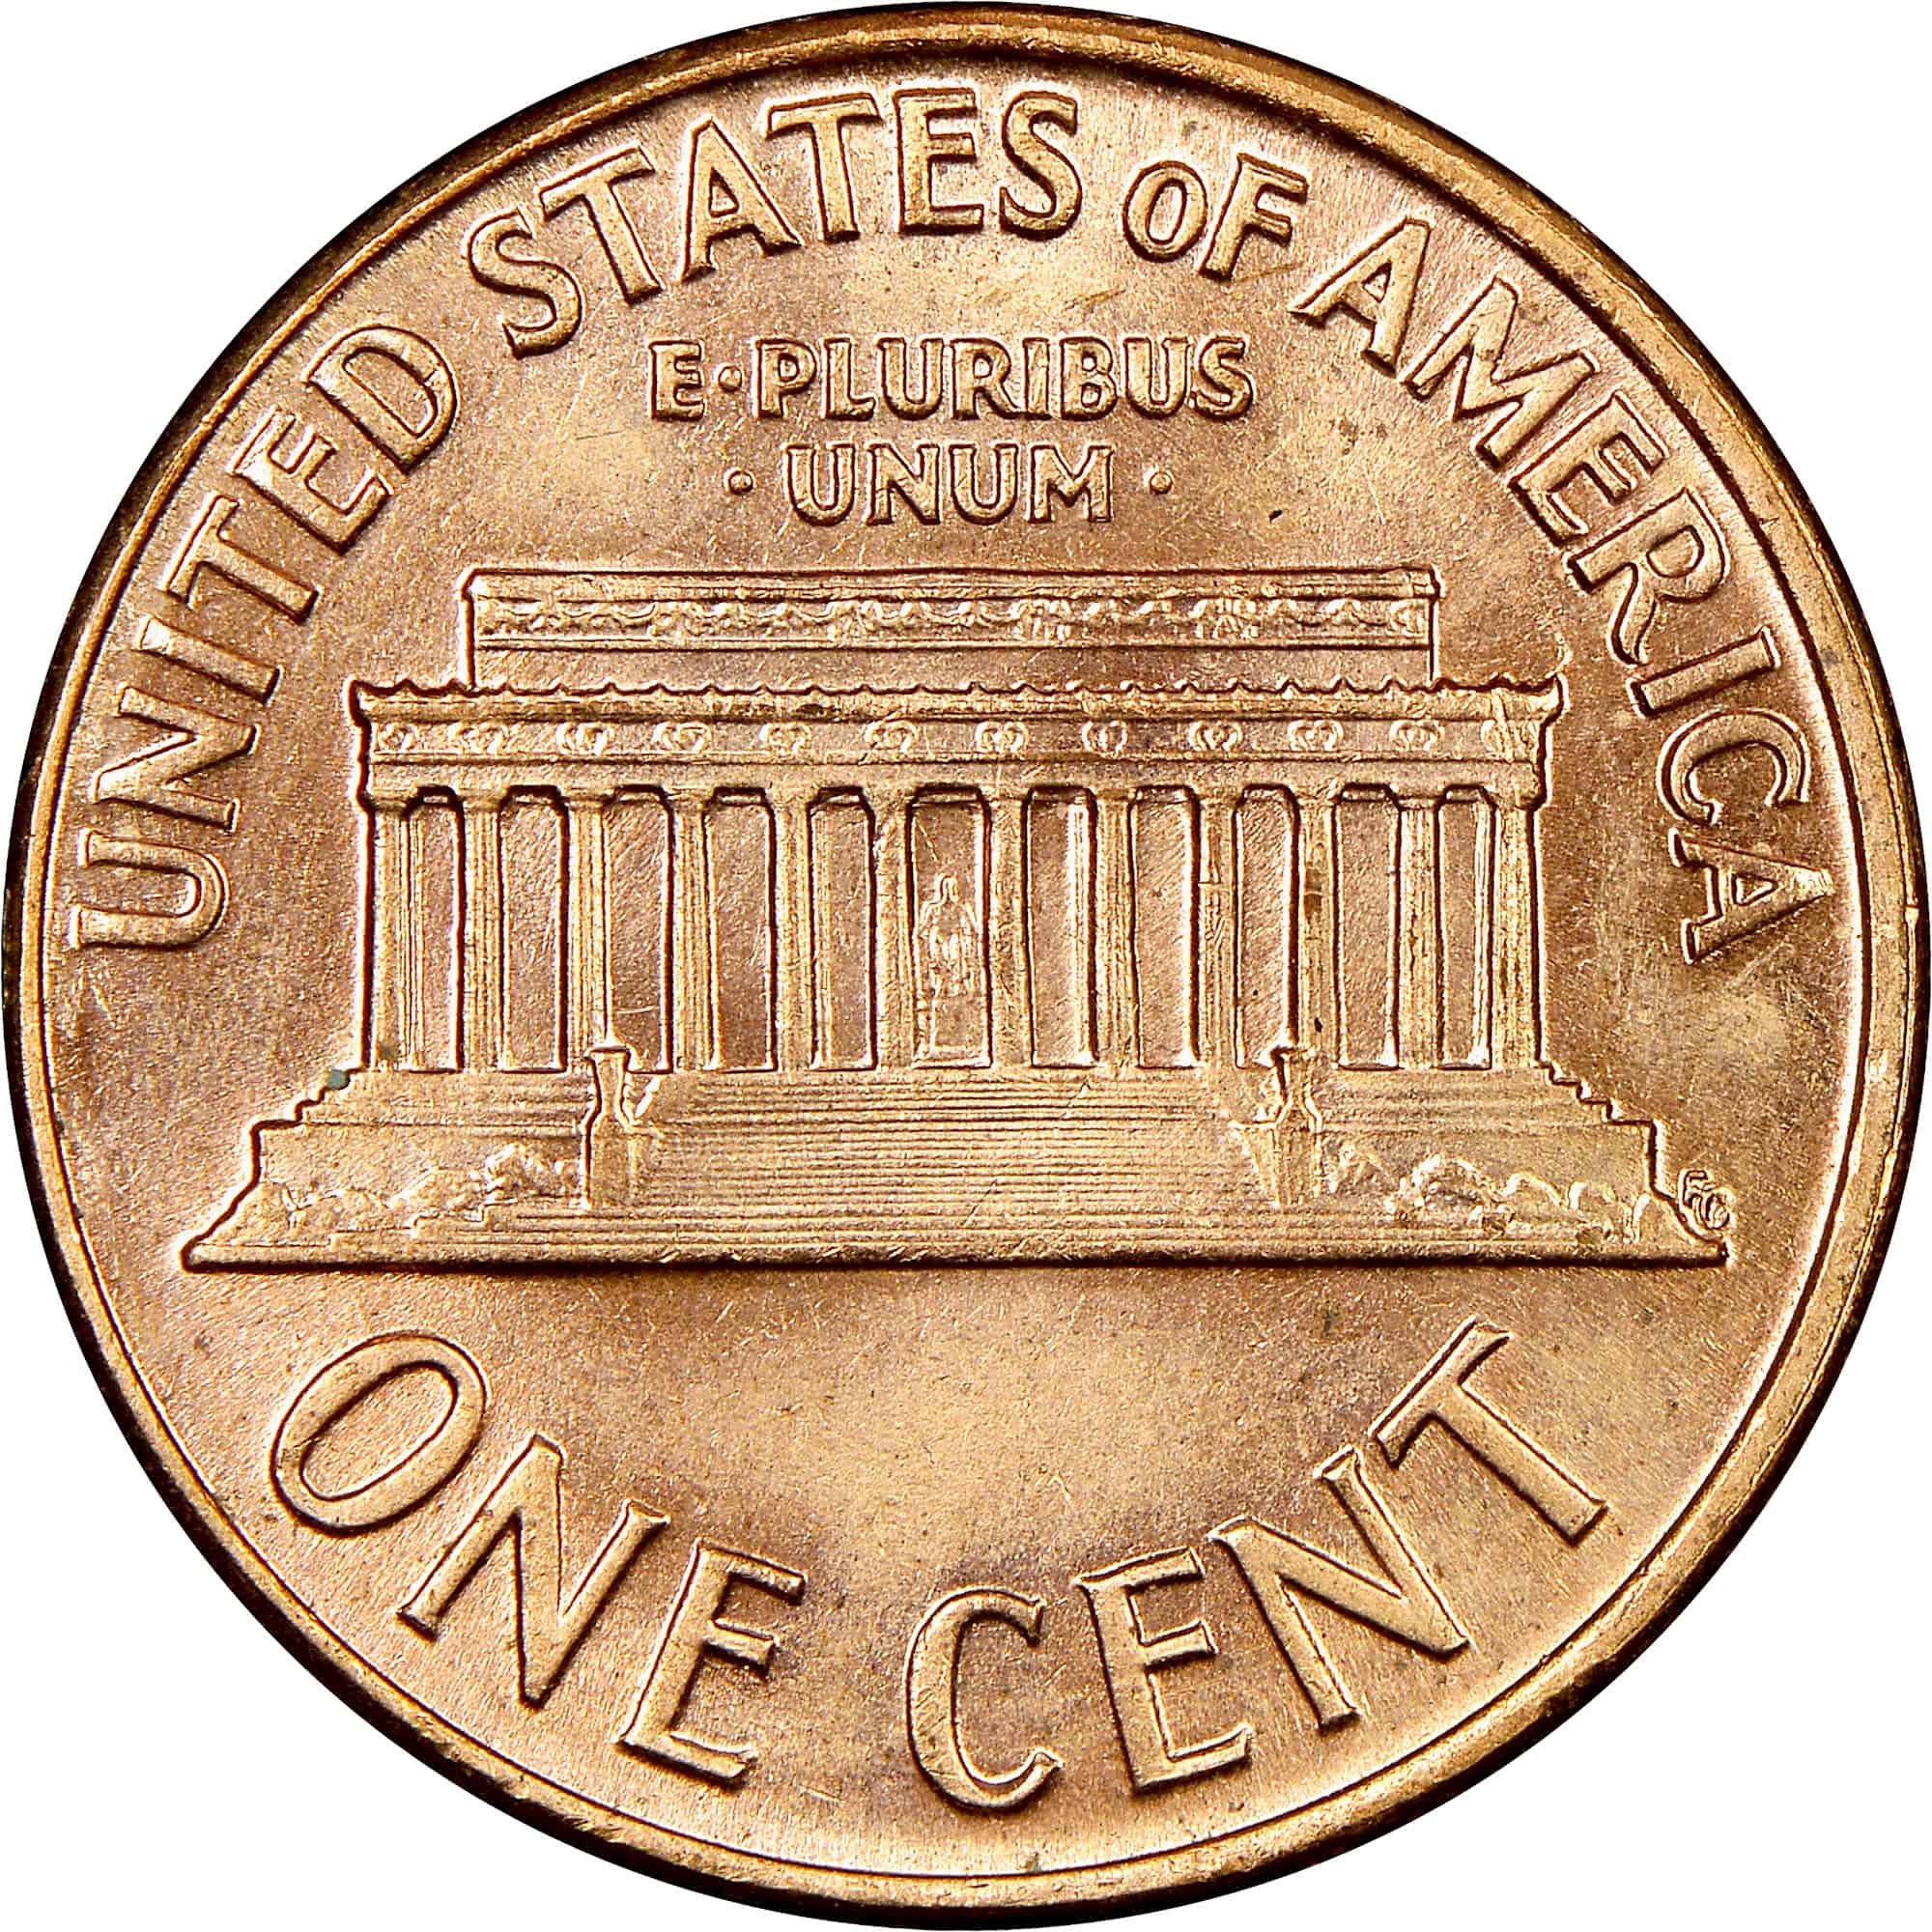 The reverse of the 1959 Lincoln penny